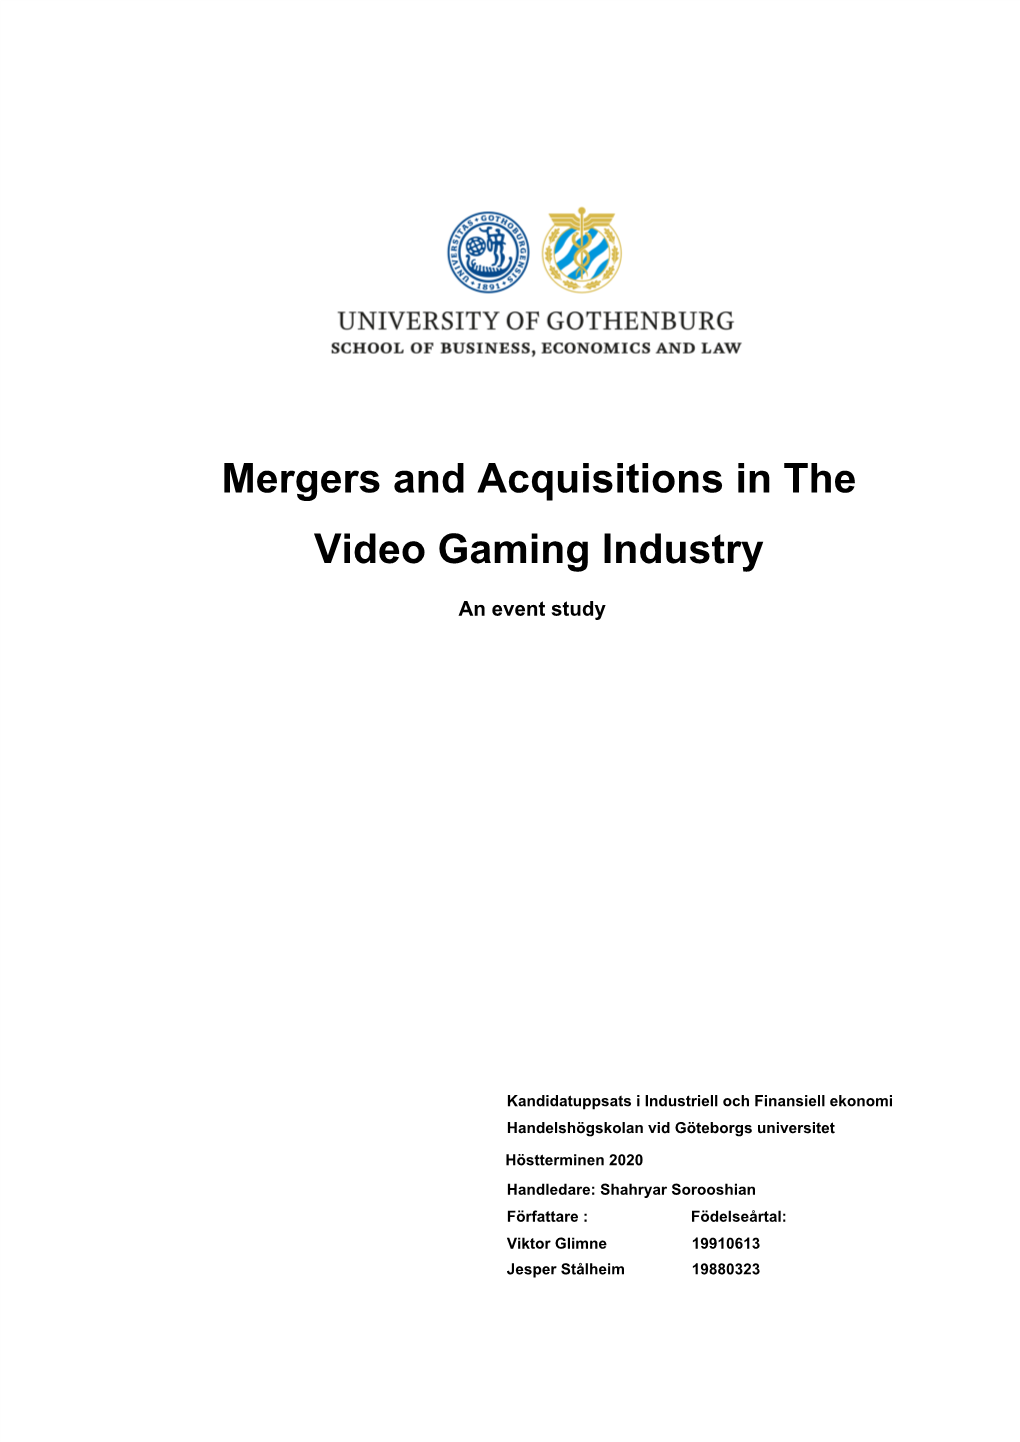 Mergers and Acquisitions in the Video Gaming Industry